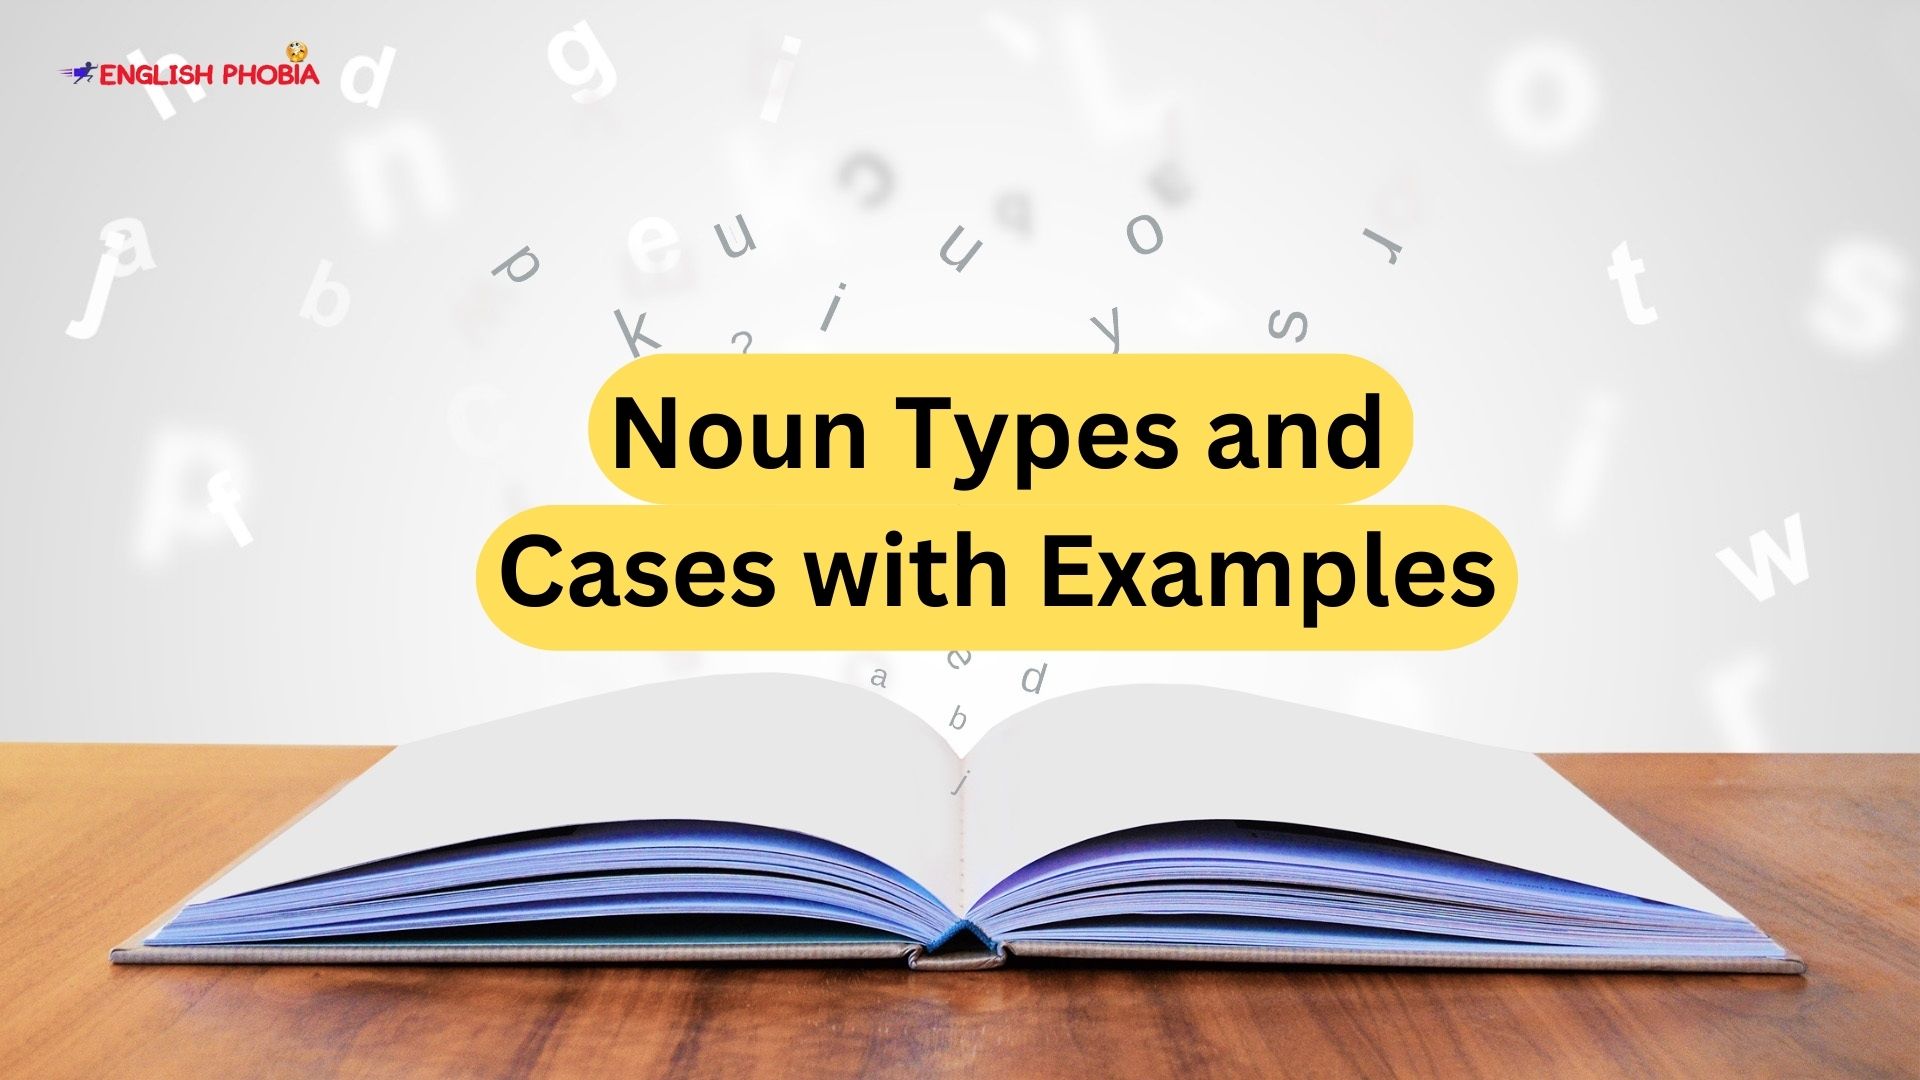 Noun Types and Cases with Examples